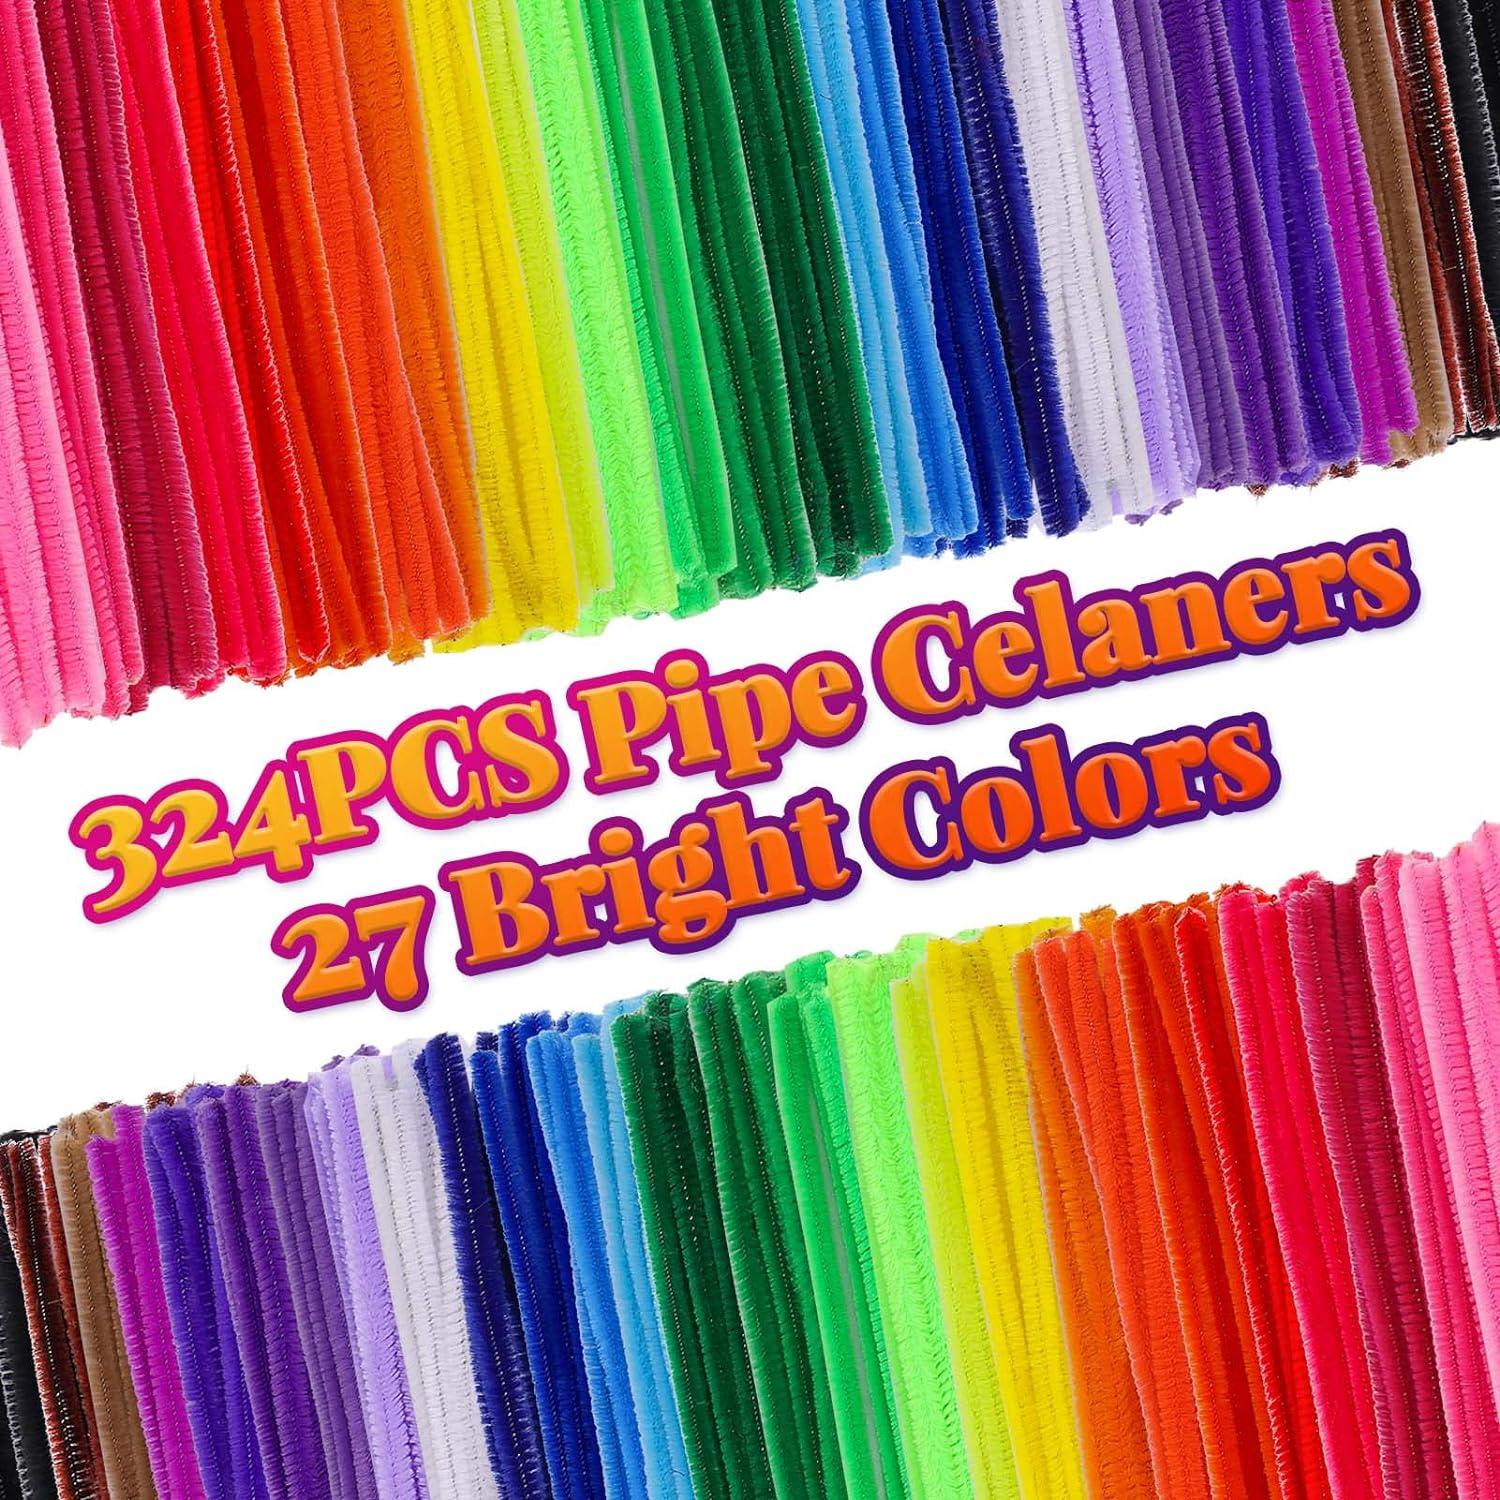 Caydo 1000 Pieces Pipe Cleaners Assorted 20 Colors Chenille Stems Bulk for  Kids Art and Crafts Projects and Decorations(6 mm x 12 inch)